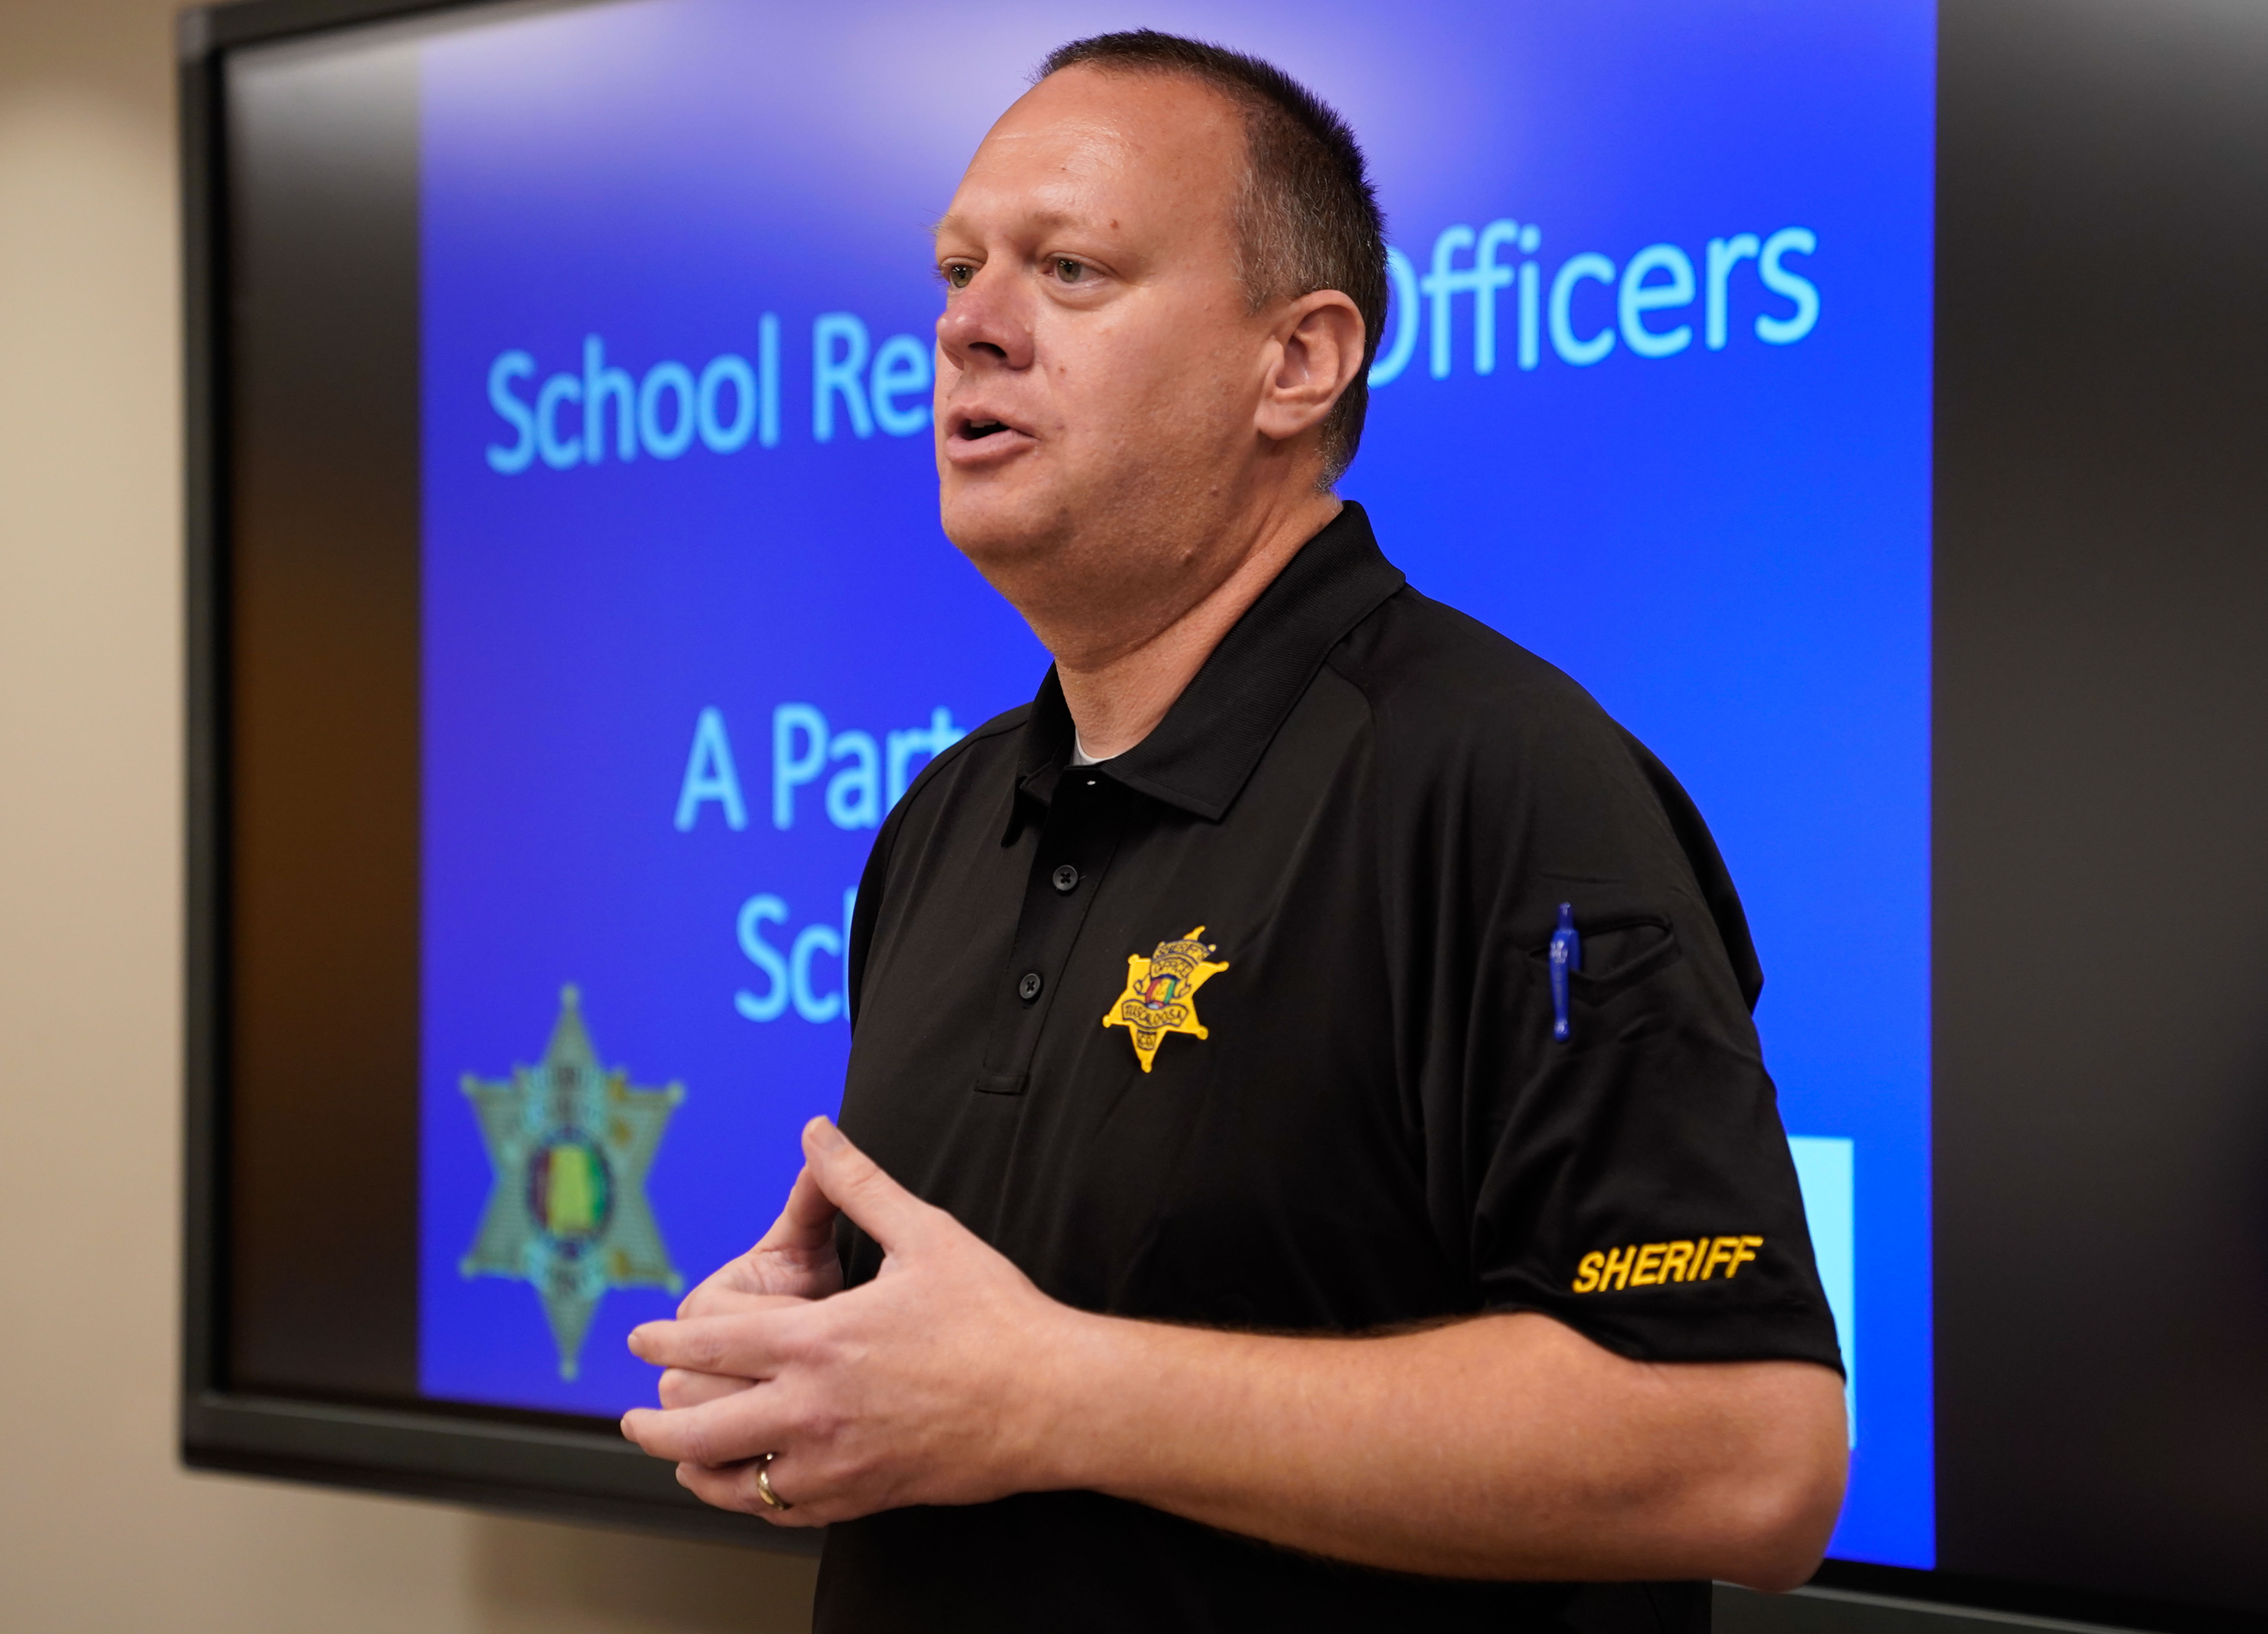 Sergeant Jeff Judd from the Tuscaloosa County Sheriff's Office talks about school safety at the PLA meeting.